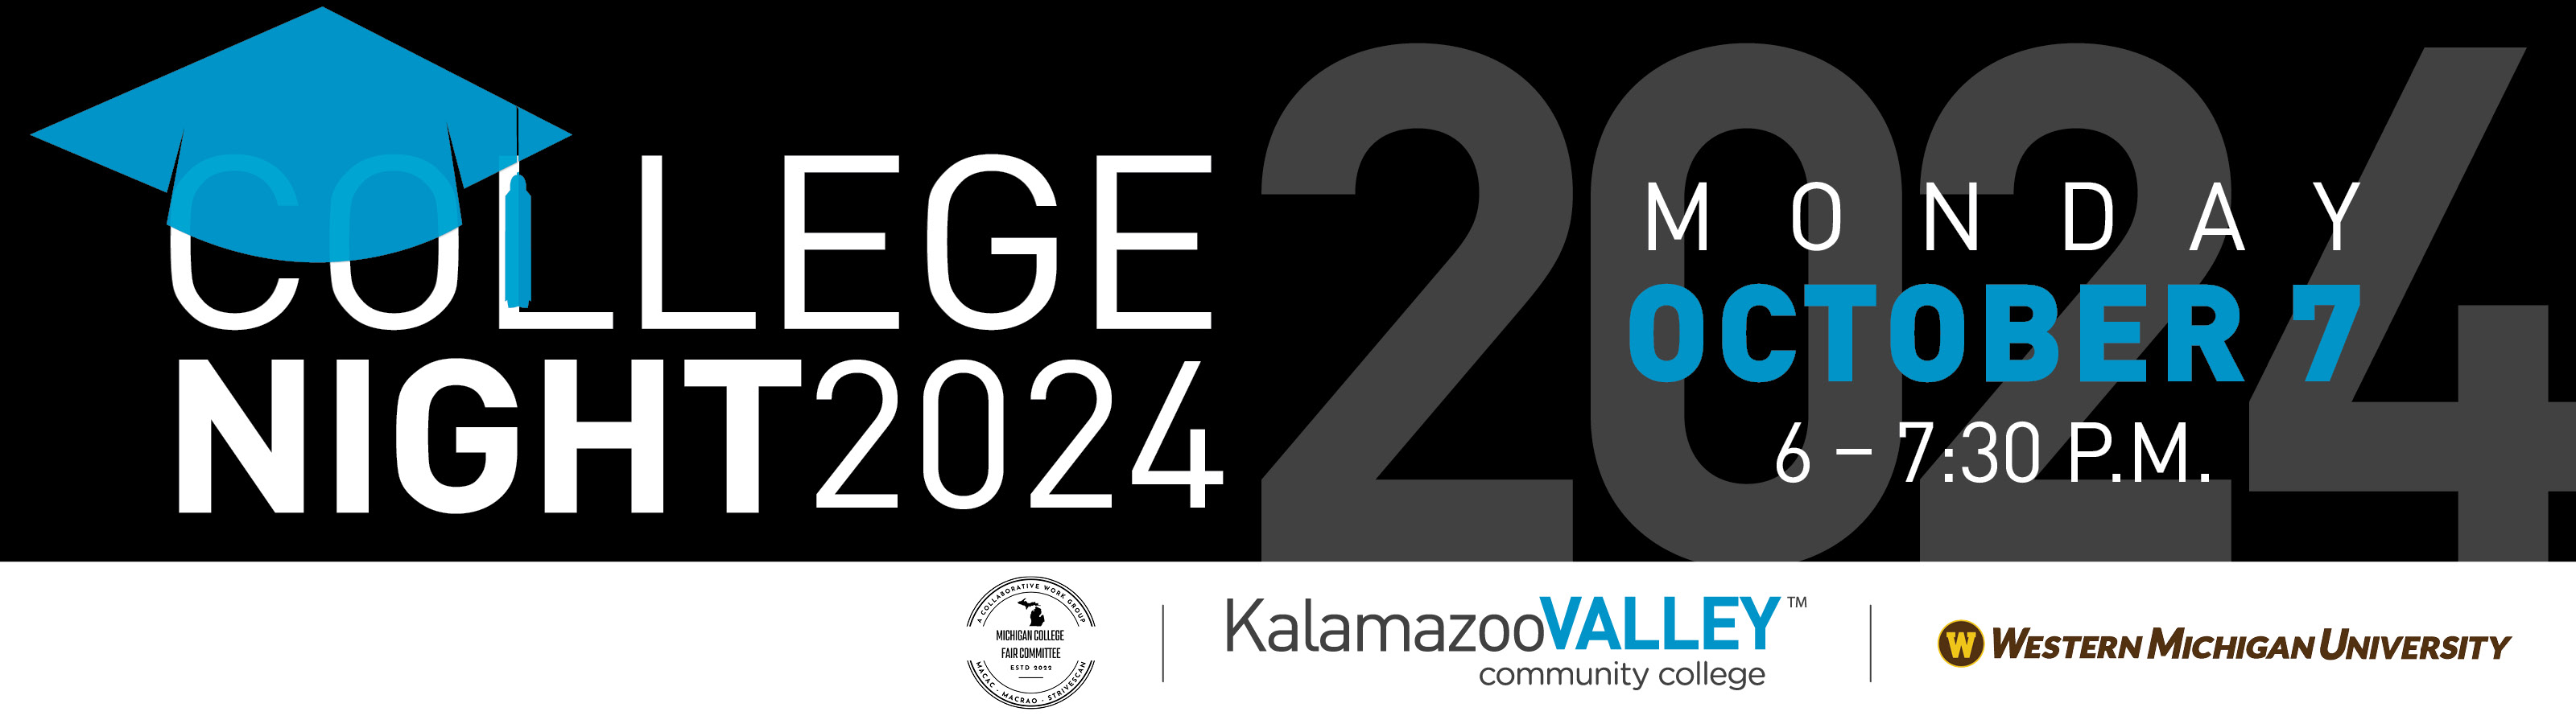 2024 Greater Kalamazoo Area College Night on Monday, October 7 at Kalamazoo Valley Community College’s Texas Township Campus